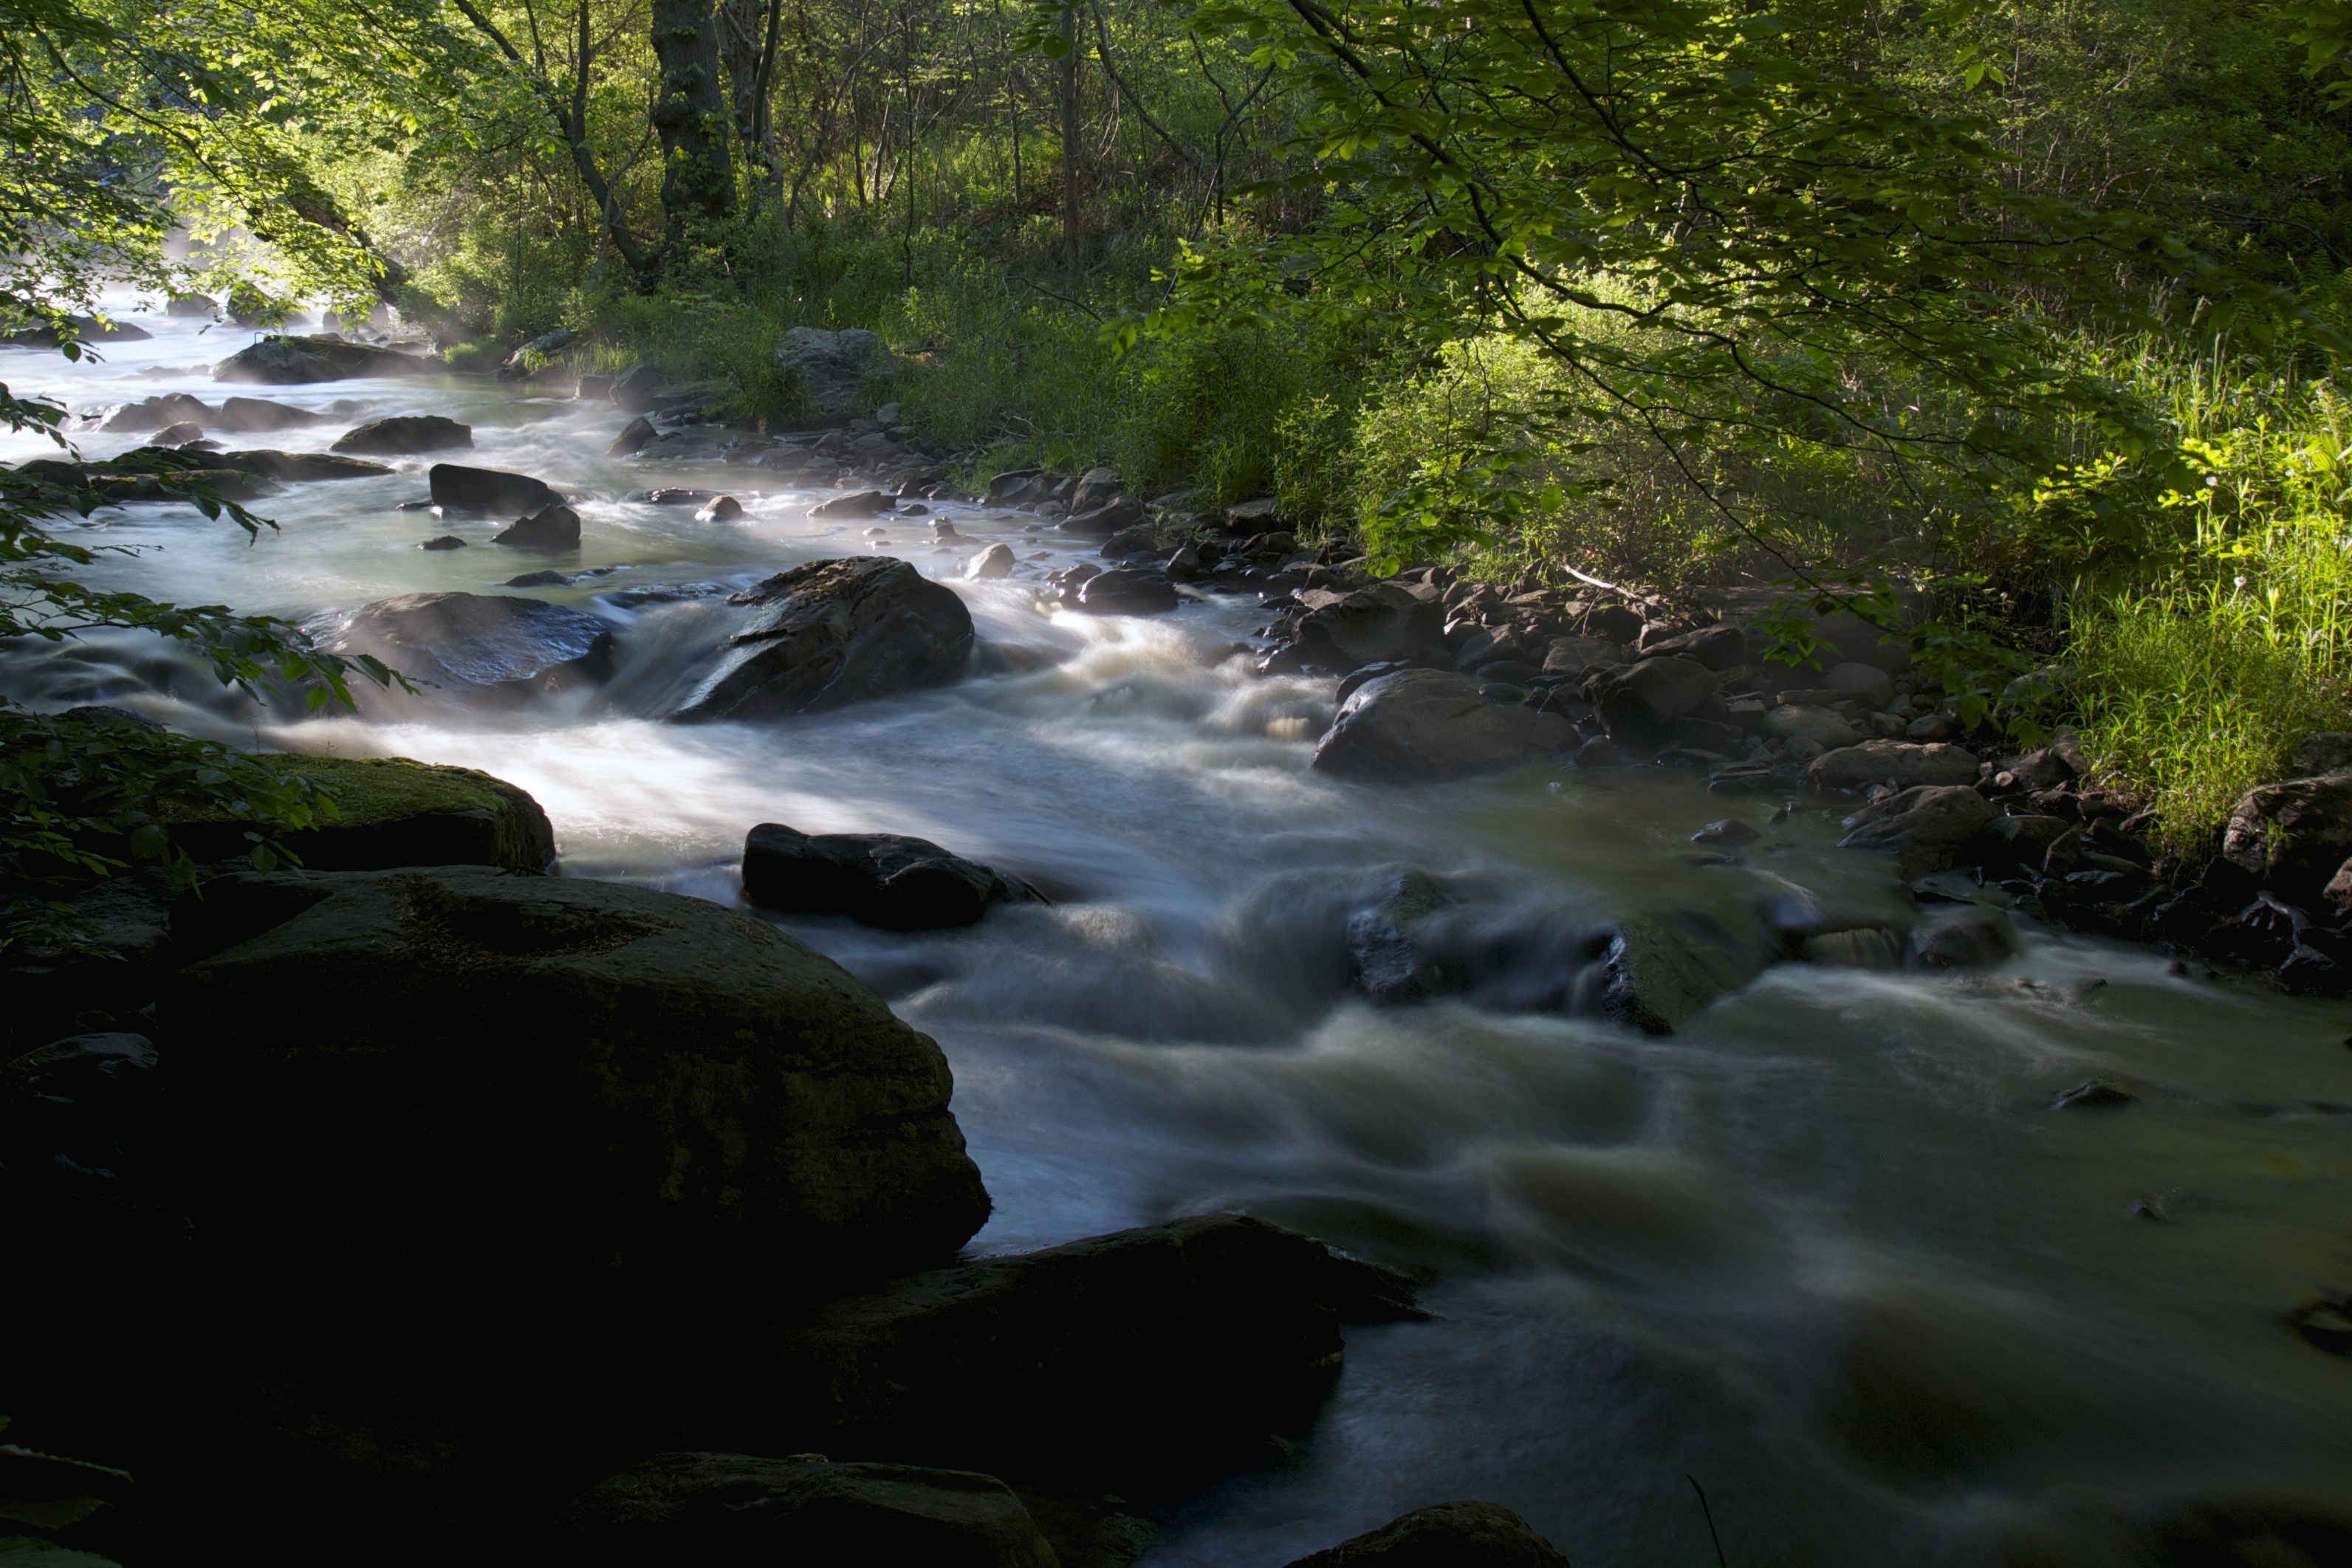 A serene creek flows through verdant forest. The blurred surface of the water is dappled with light.